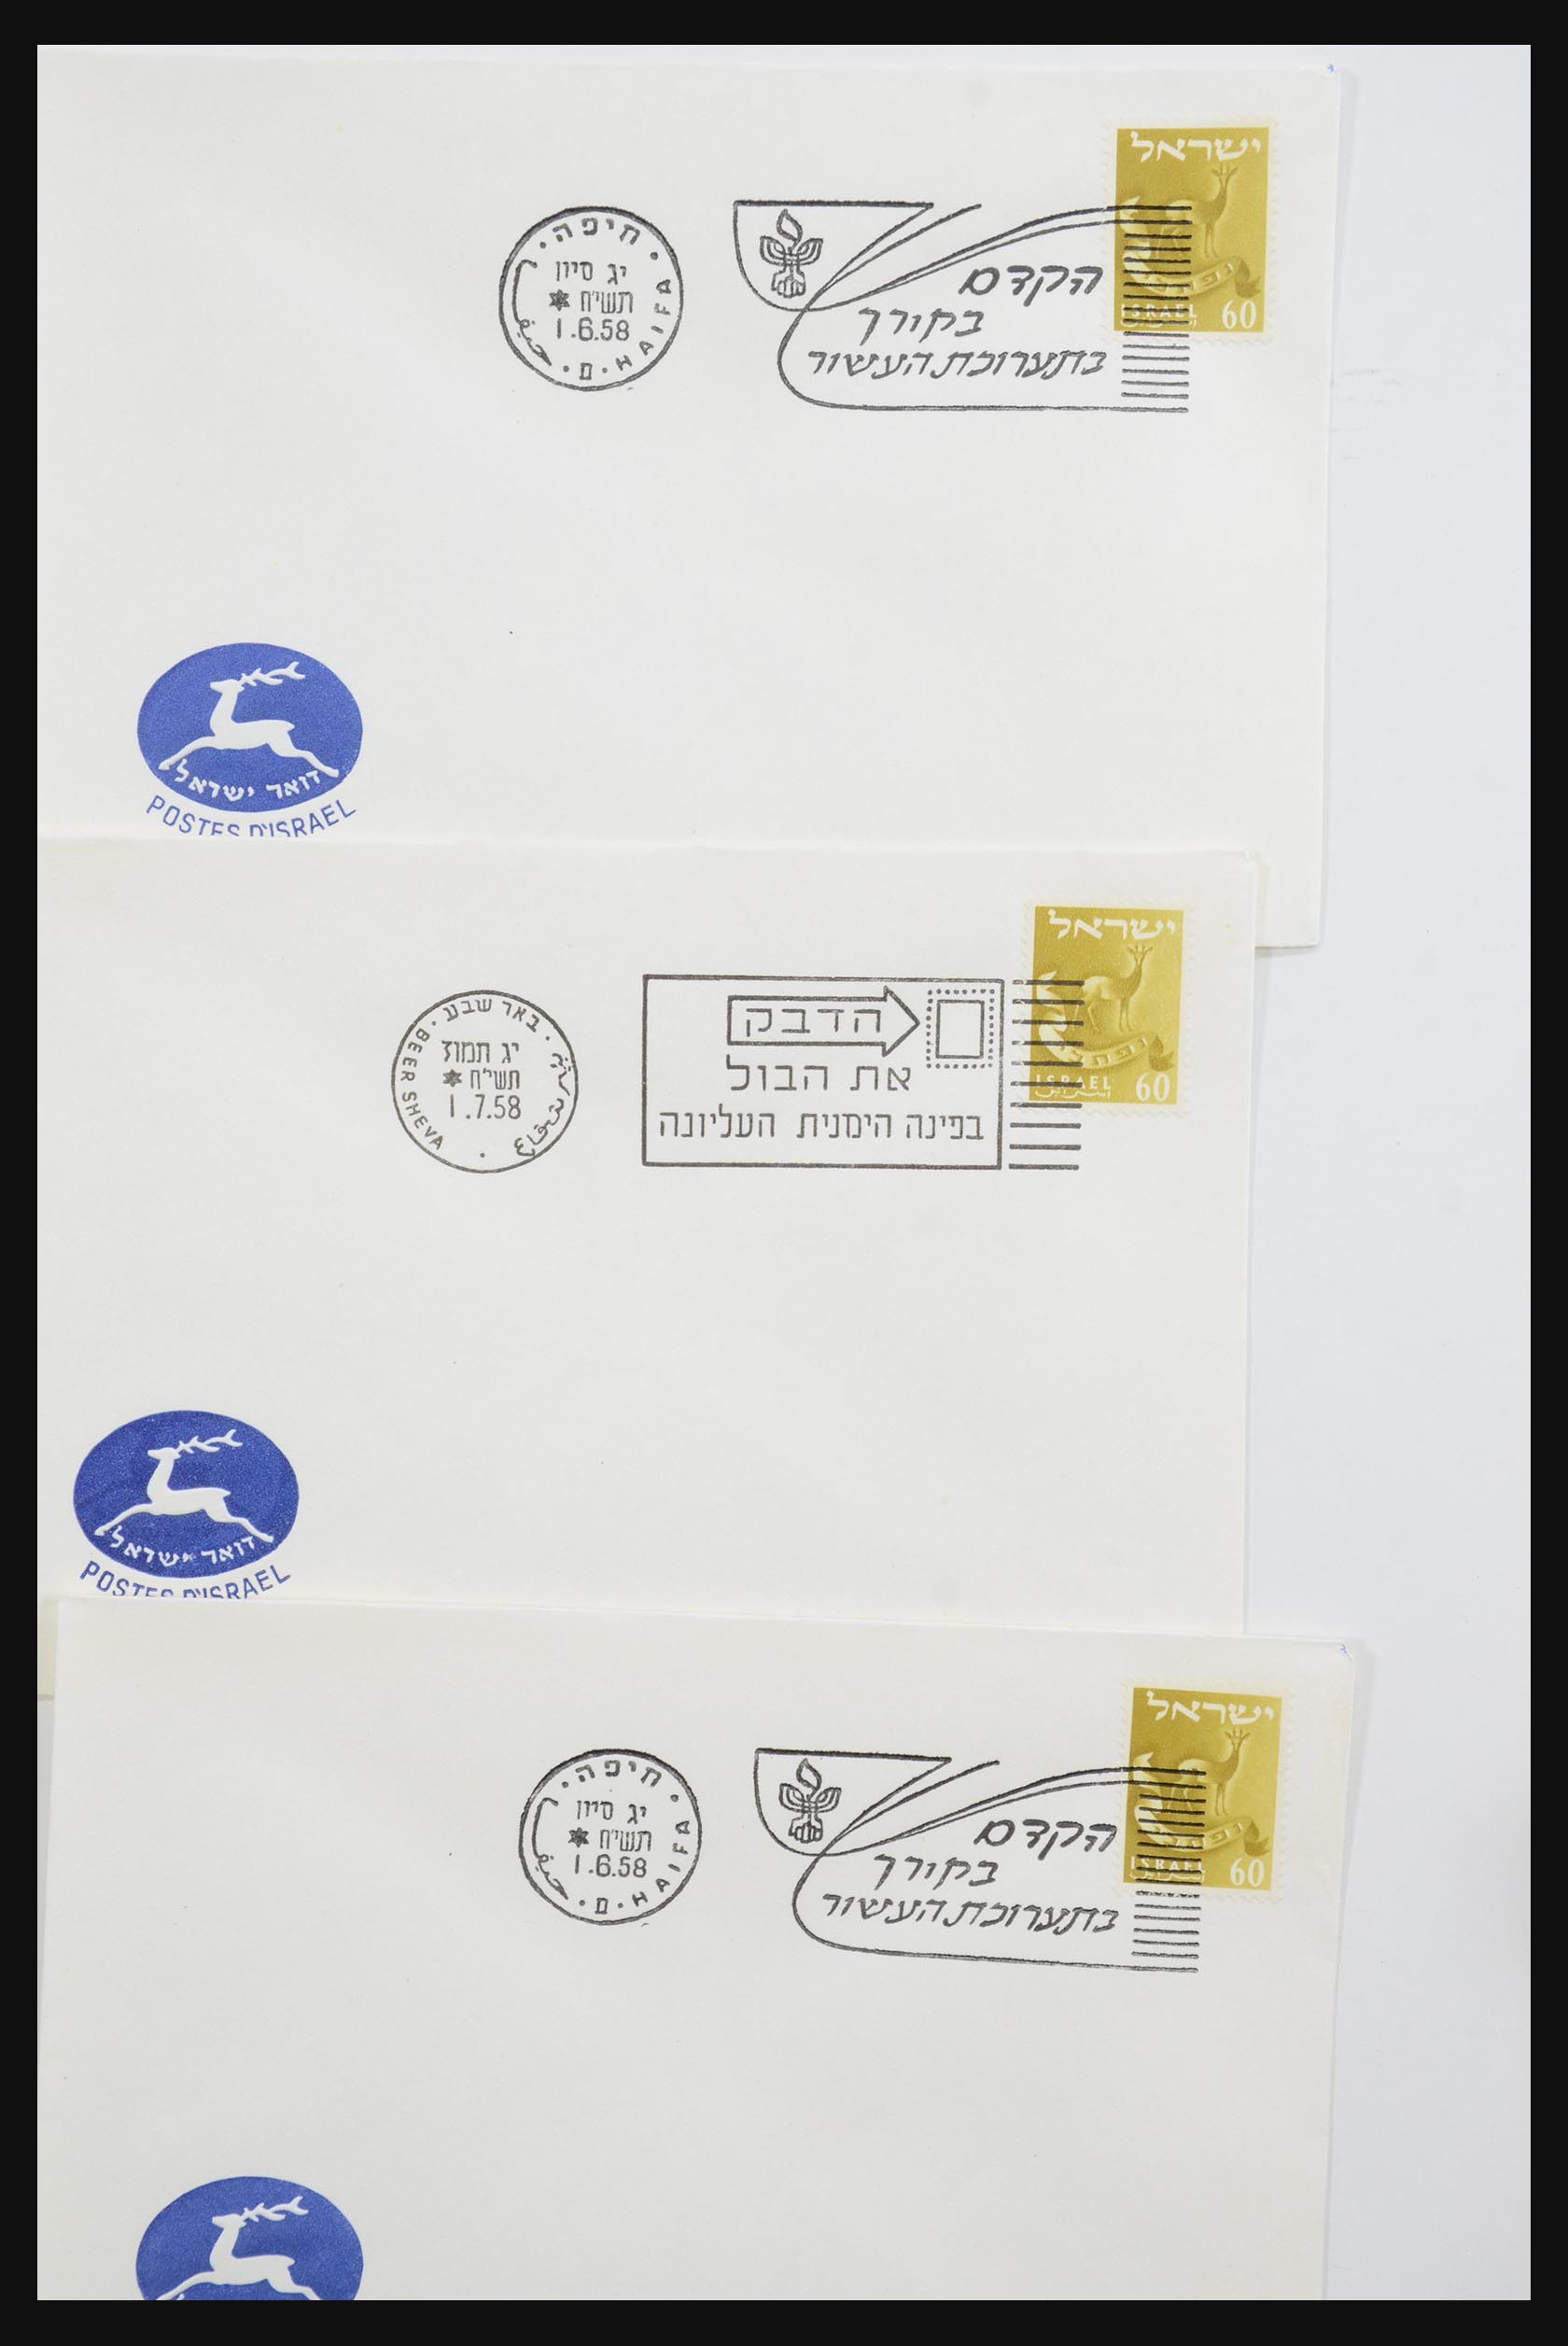 31924 040 - 31924 Israel first day cover collection 1957-2003.